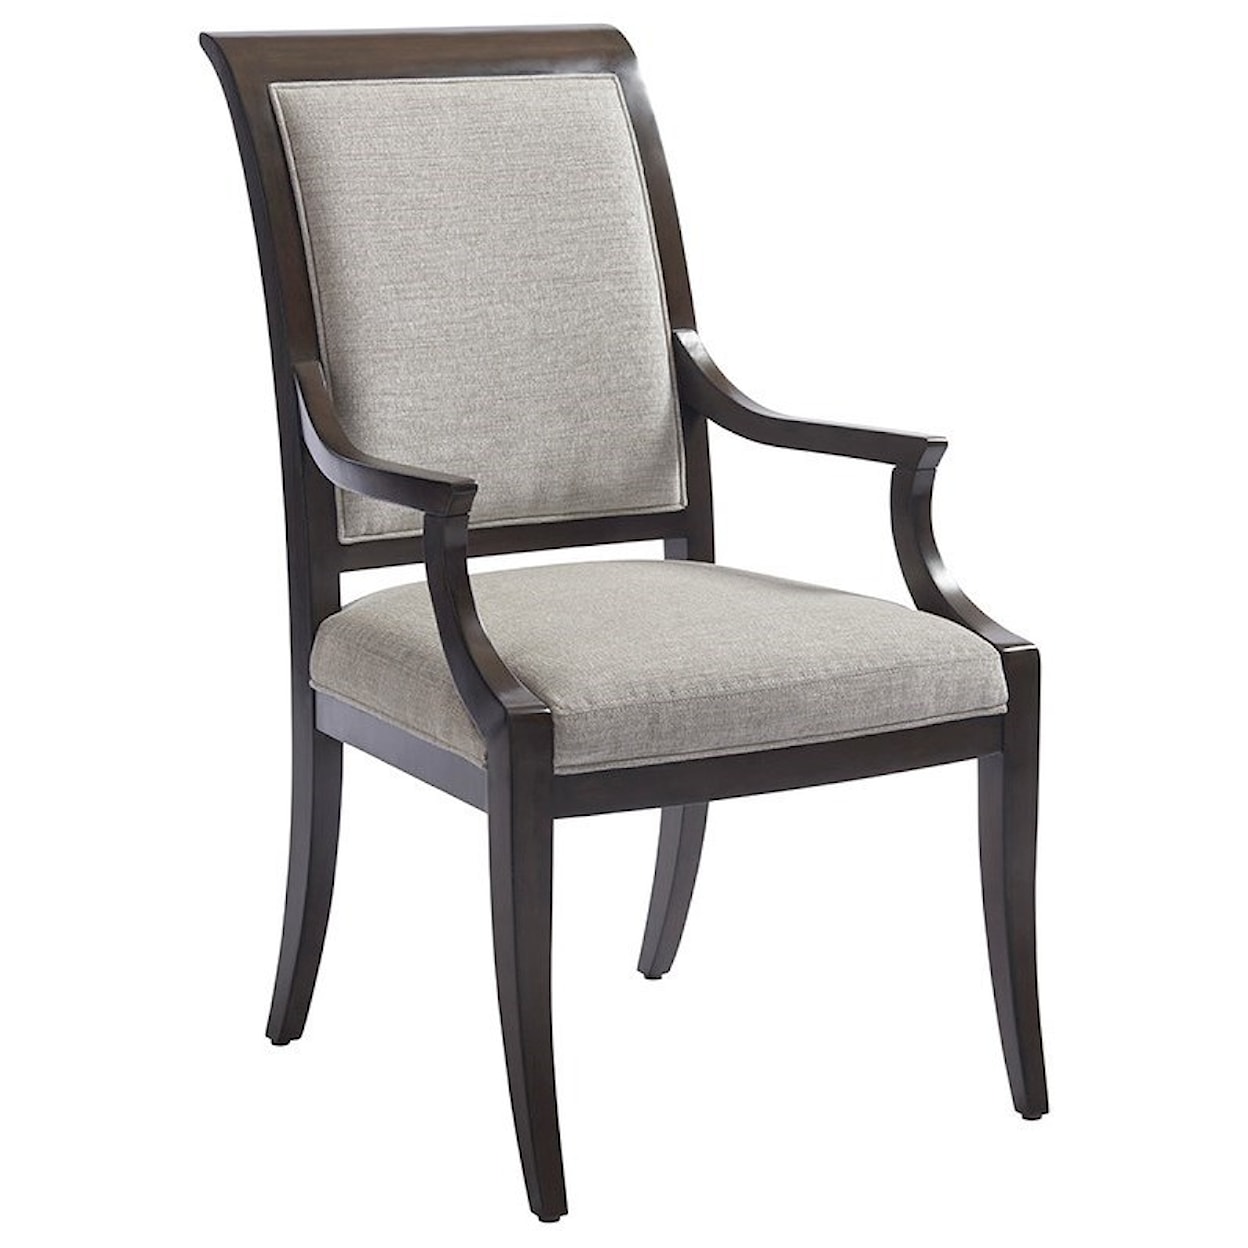 Barclay Butera Brentwood Kathryn Arm Chair (married)